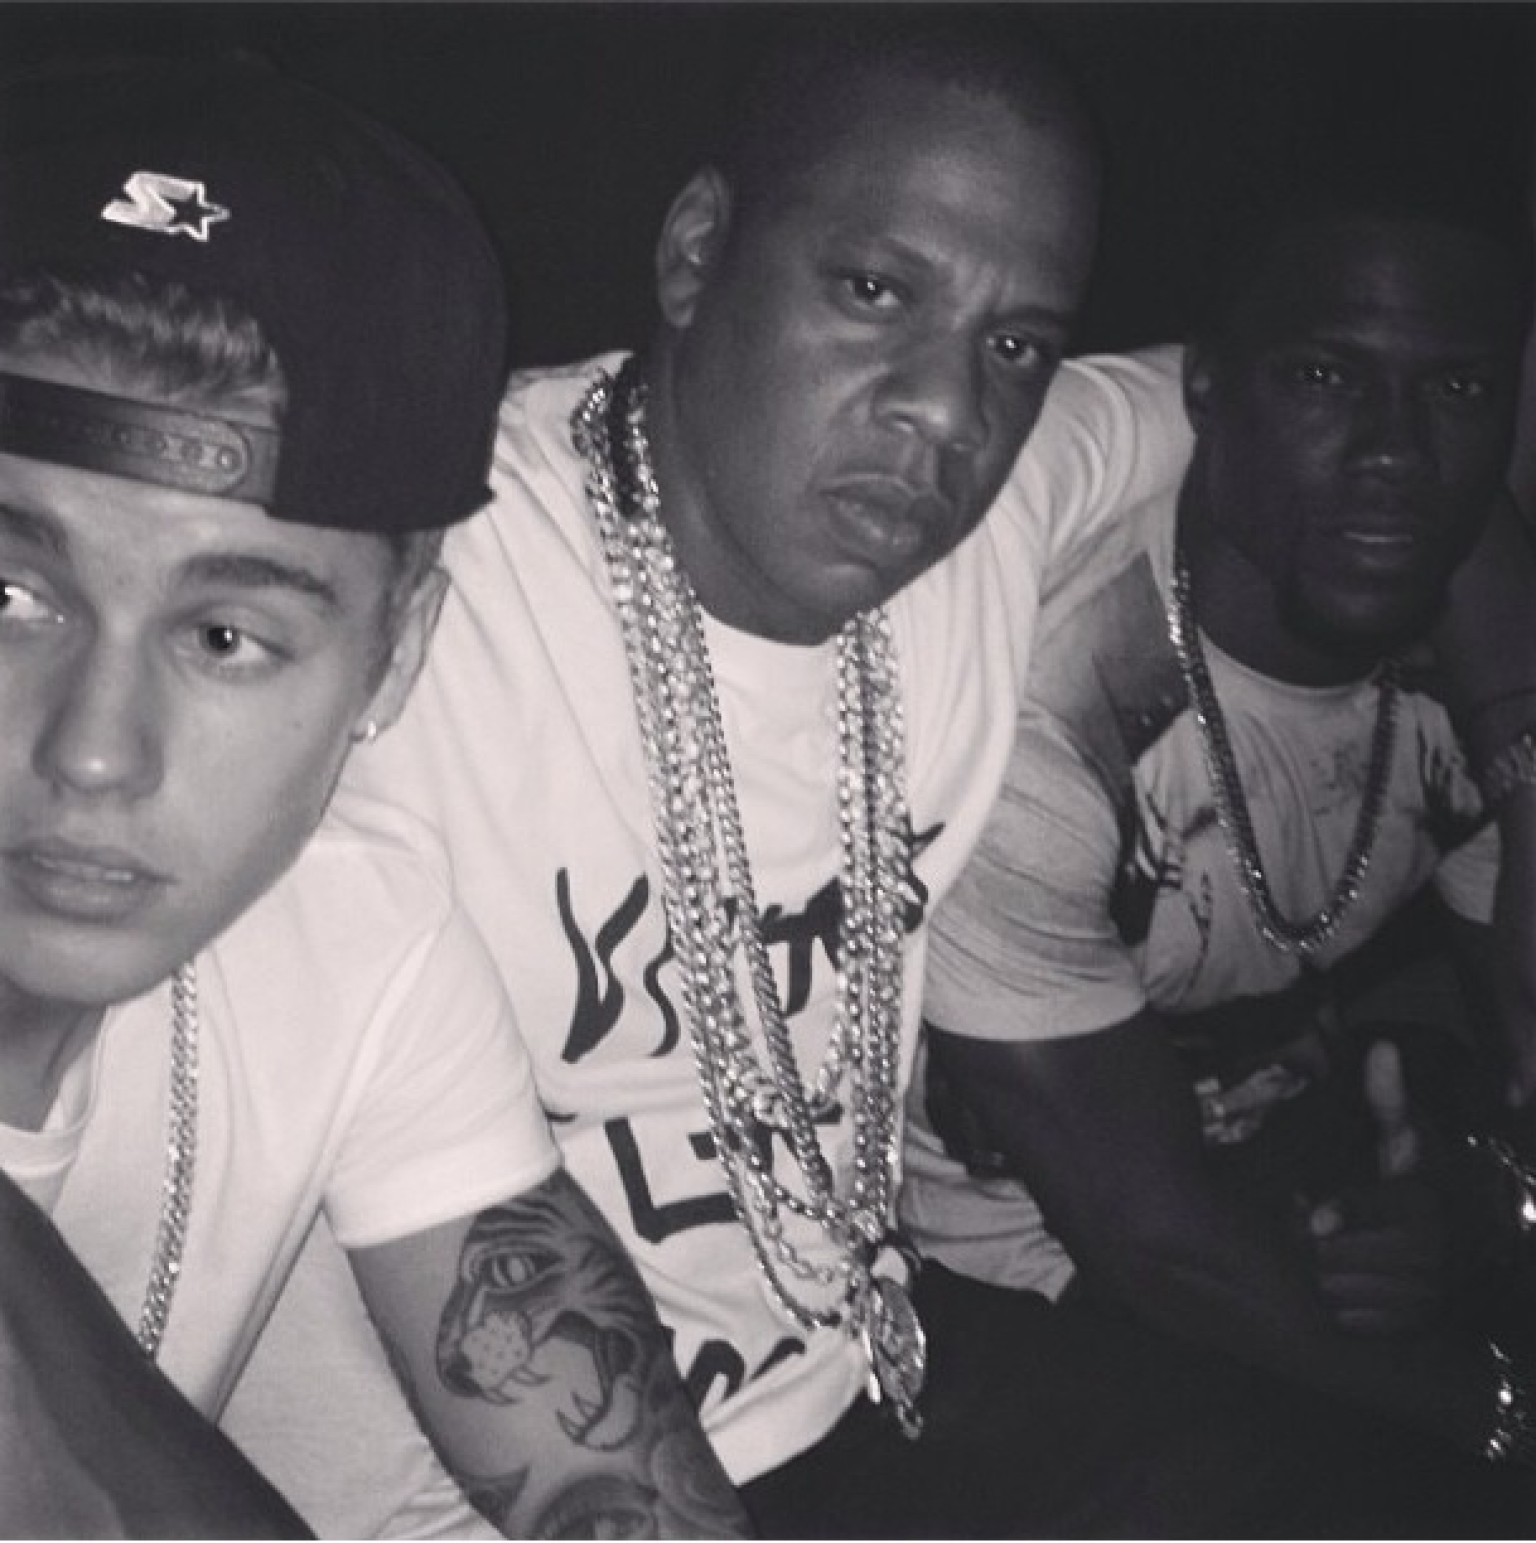 Justin Bieber, Jay Z And Kevin Hart All Hang Out Together Like It's No Big Deal | HuffPost